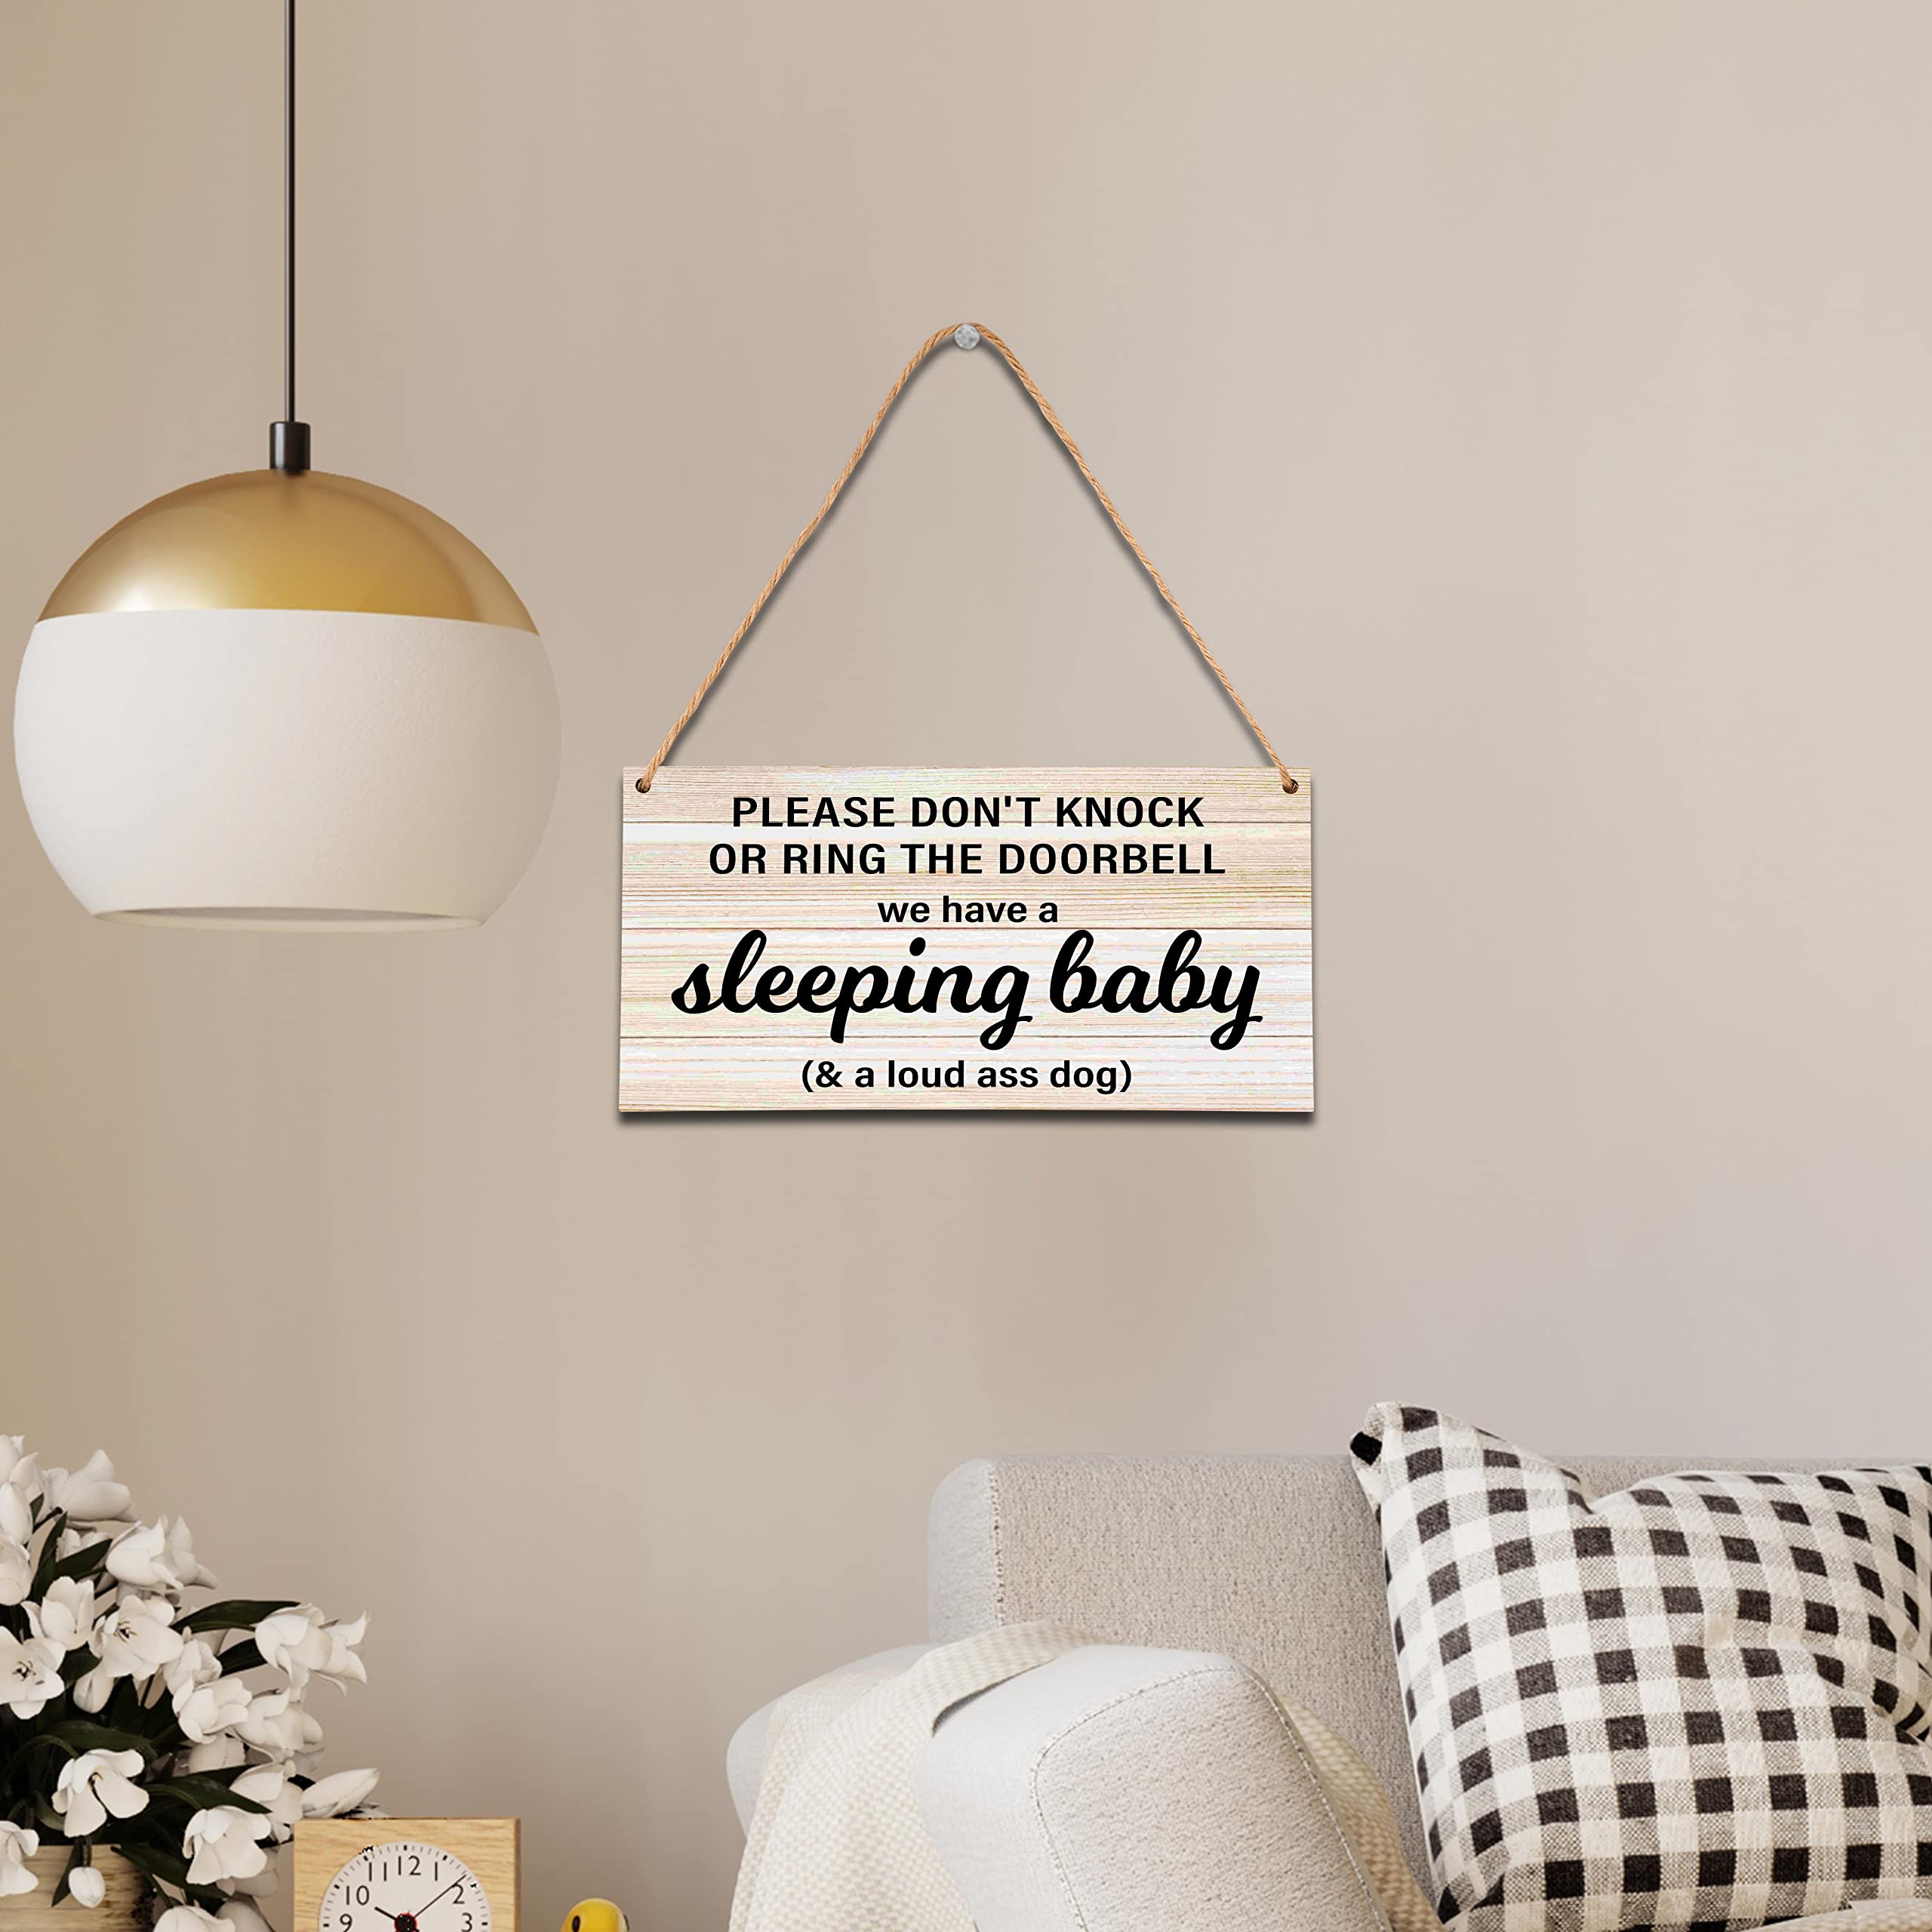 Baby Sleeping Sign For Front Door, Do Not Knock Or Ring Doorbell Wooden Sign, Baby Room Nursery Home Bedroom Rustic Hanging Sign, Set Of 1 Wooden Sign With Rope - B06